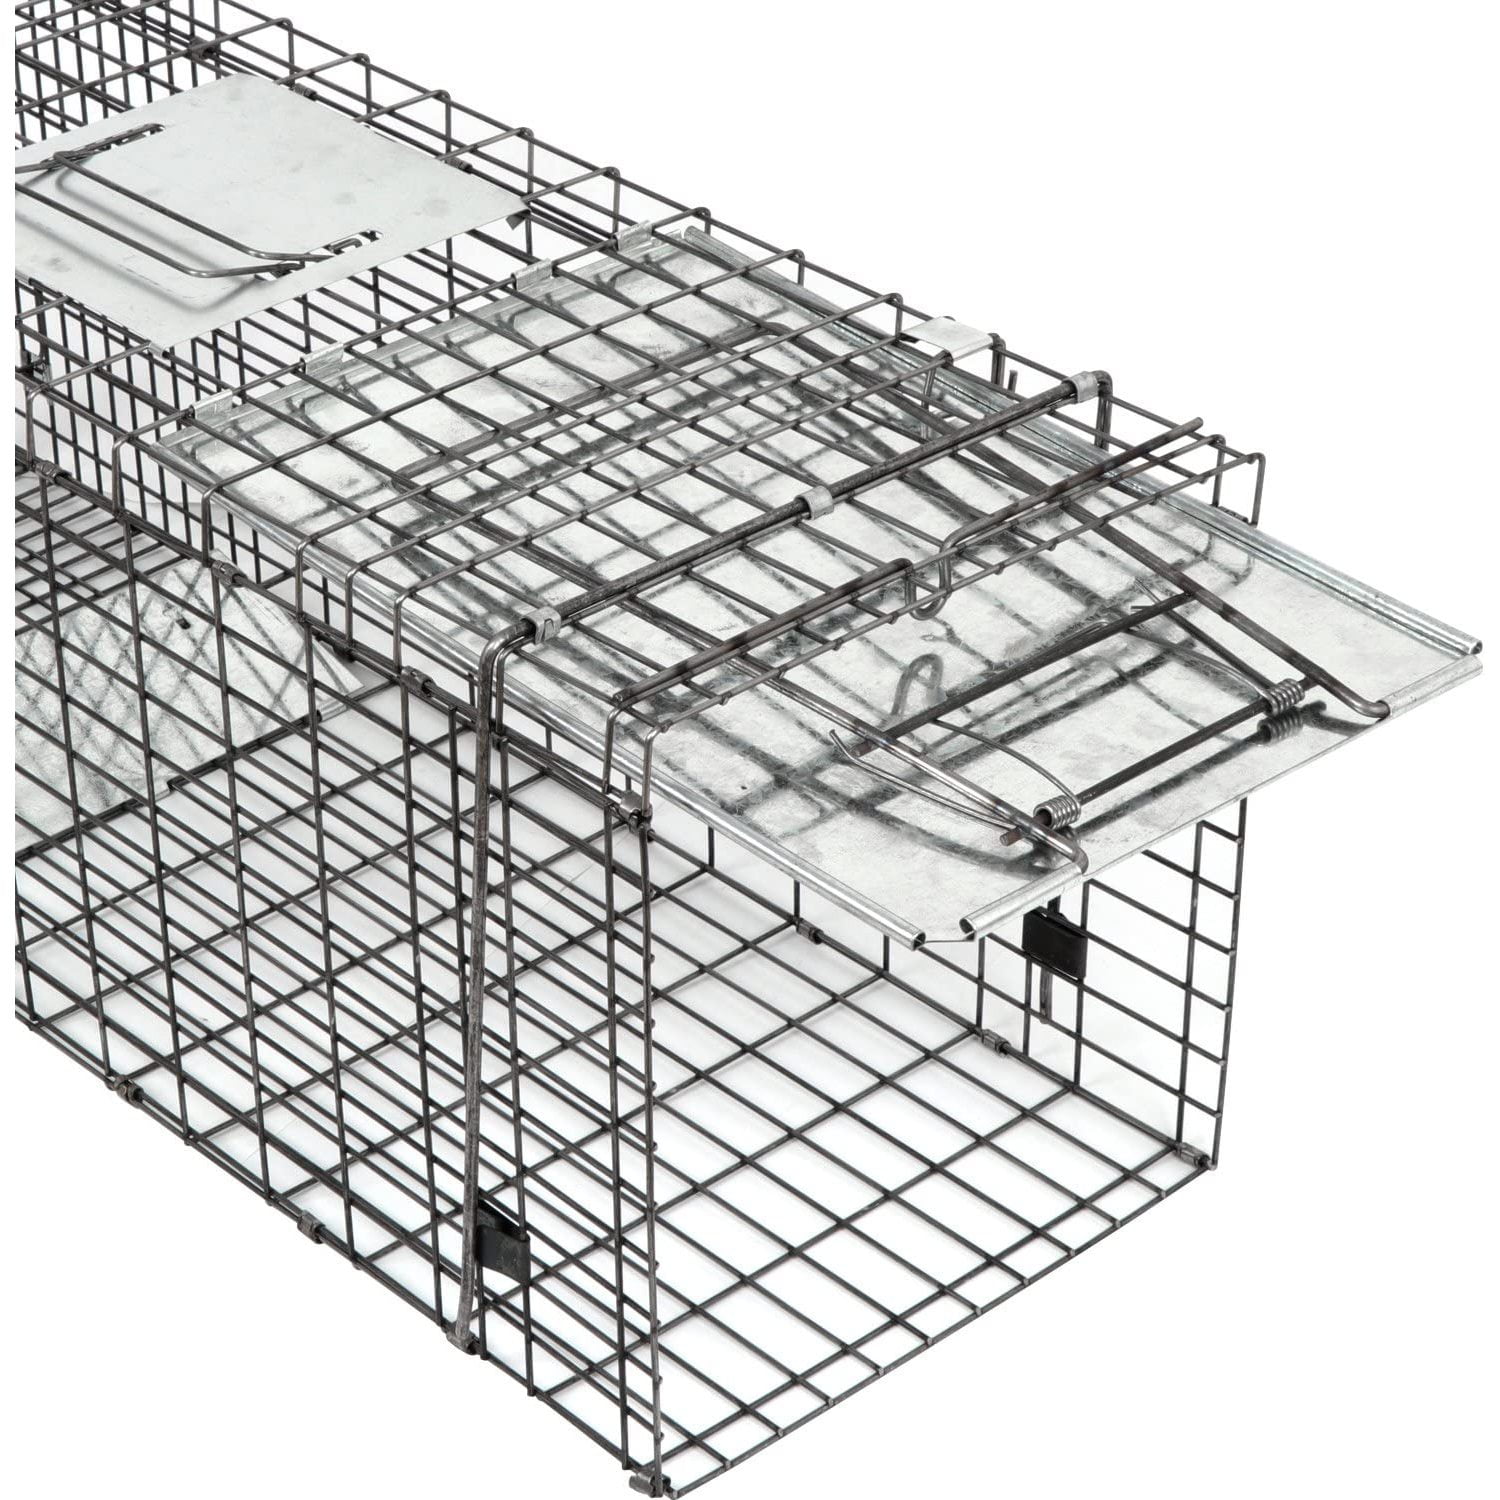 Smartxchoices Live Animal Trap Cage, 32 X 12.5 X 12 Large Humane Rodent  Catch Release Steel Cage 1-Door for Raccoon/Rabbits/Possum/Feral